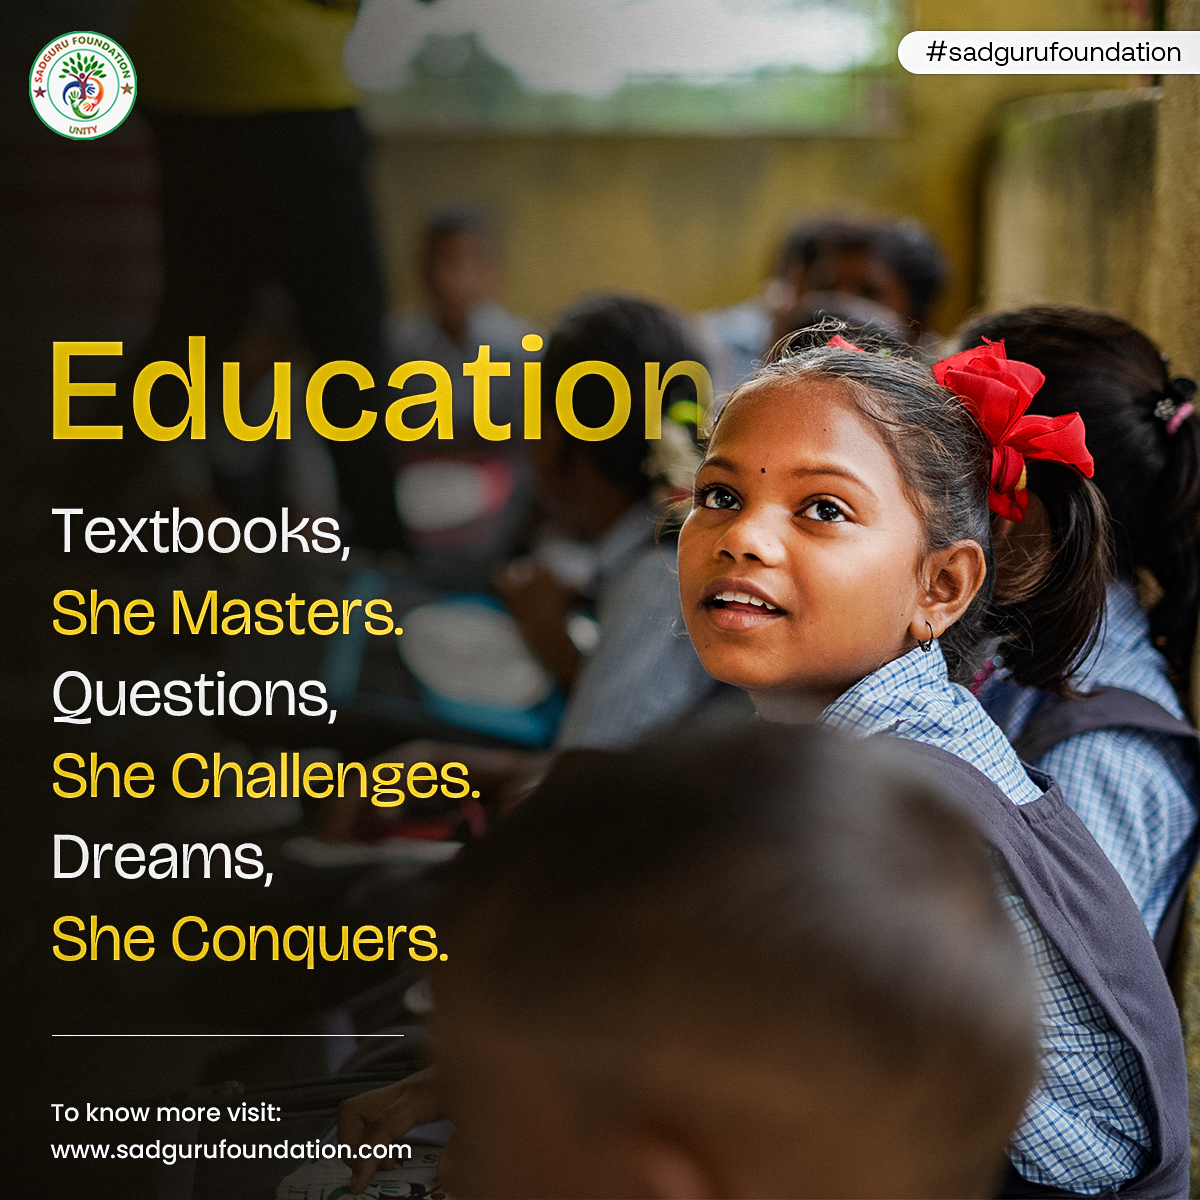 Education is a powerful tool for achieving the impossible.
Support her Now!
.
.
.
#educateher #educate #bettereducation #betterschools #facilities #village #villagelife #basicnecessities #empowerment #betterfuture #nextgeneration #india #smile #support #help #donate #charity